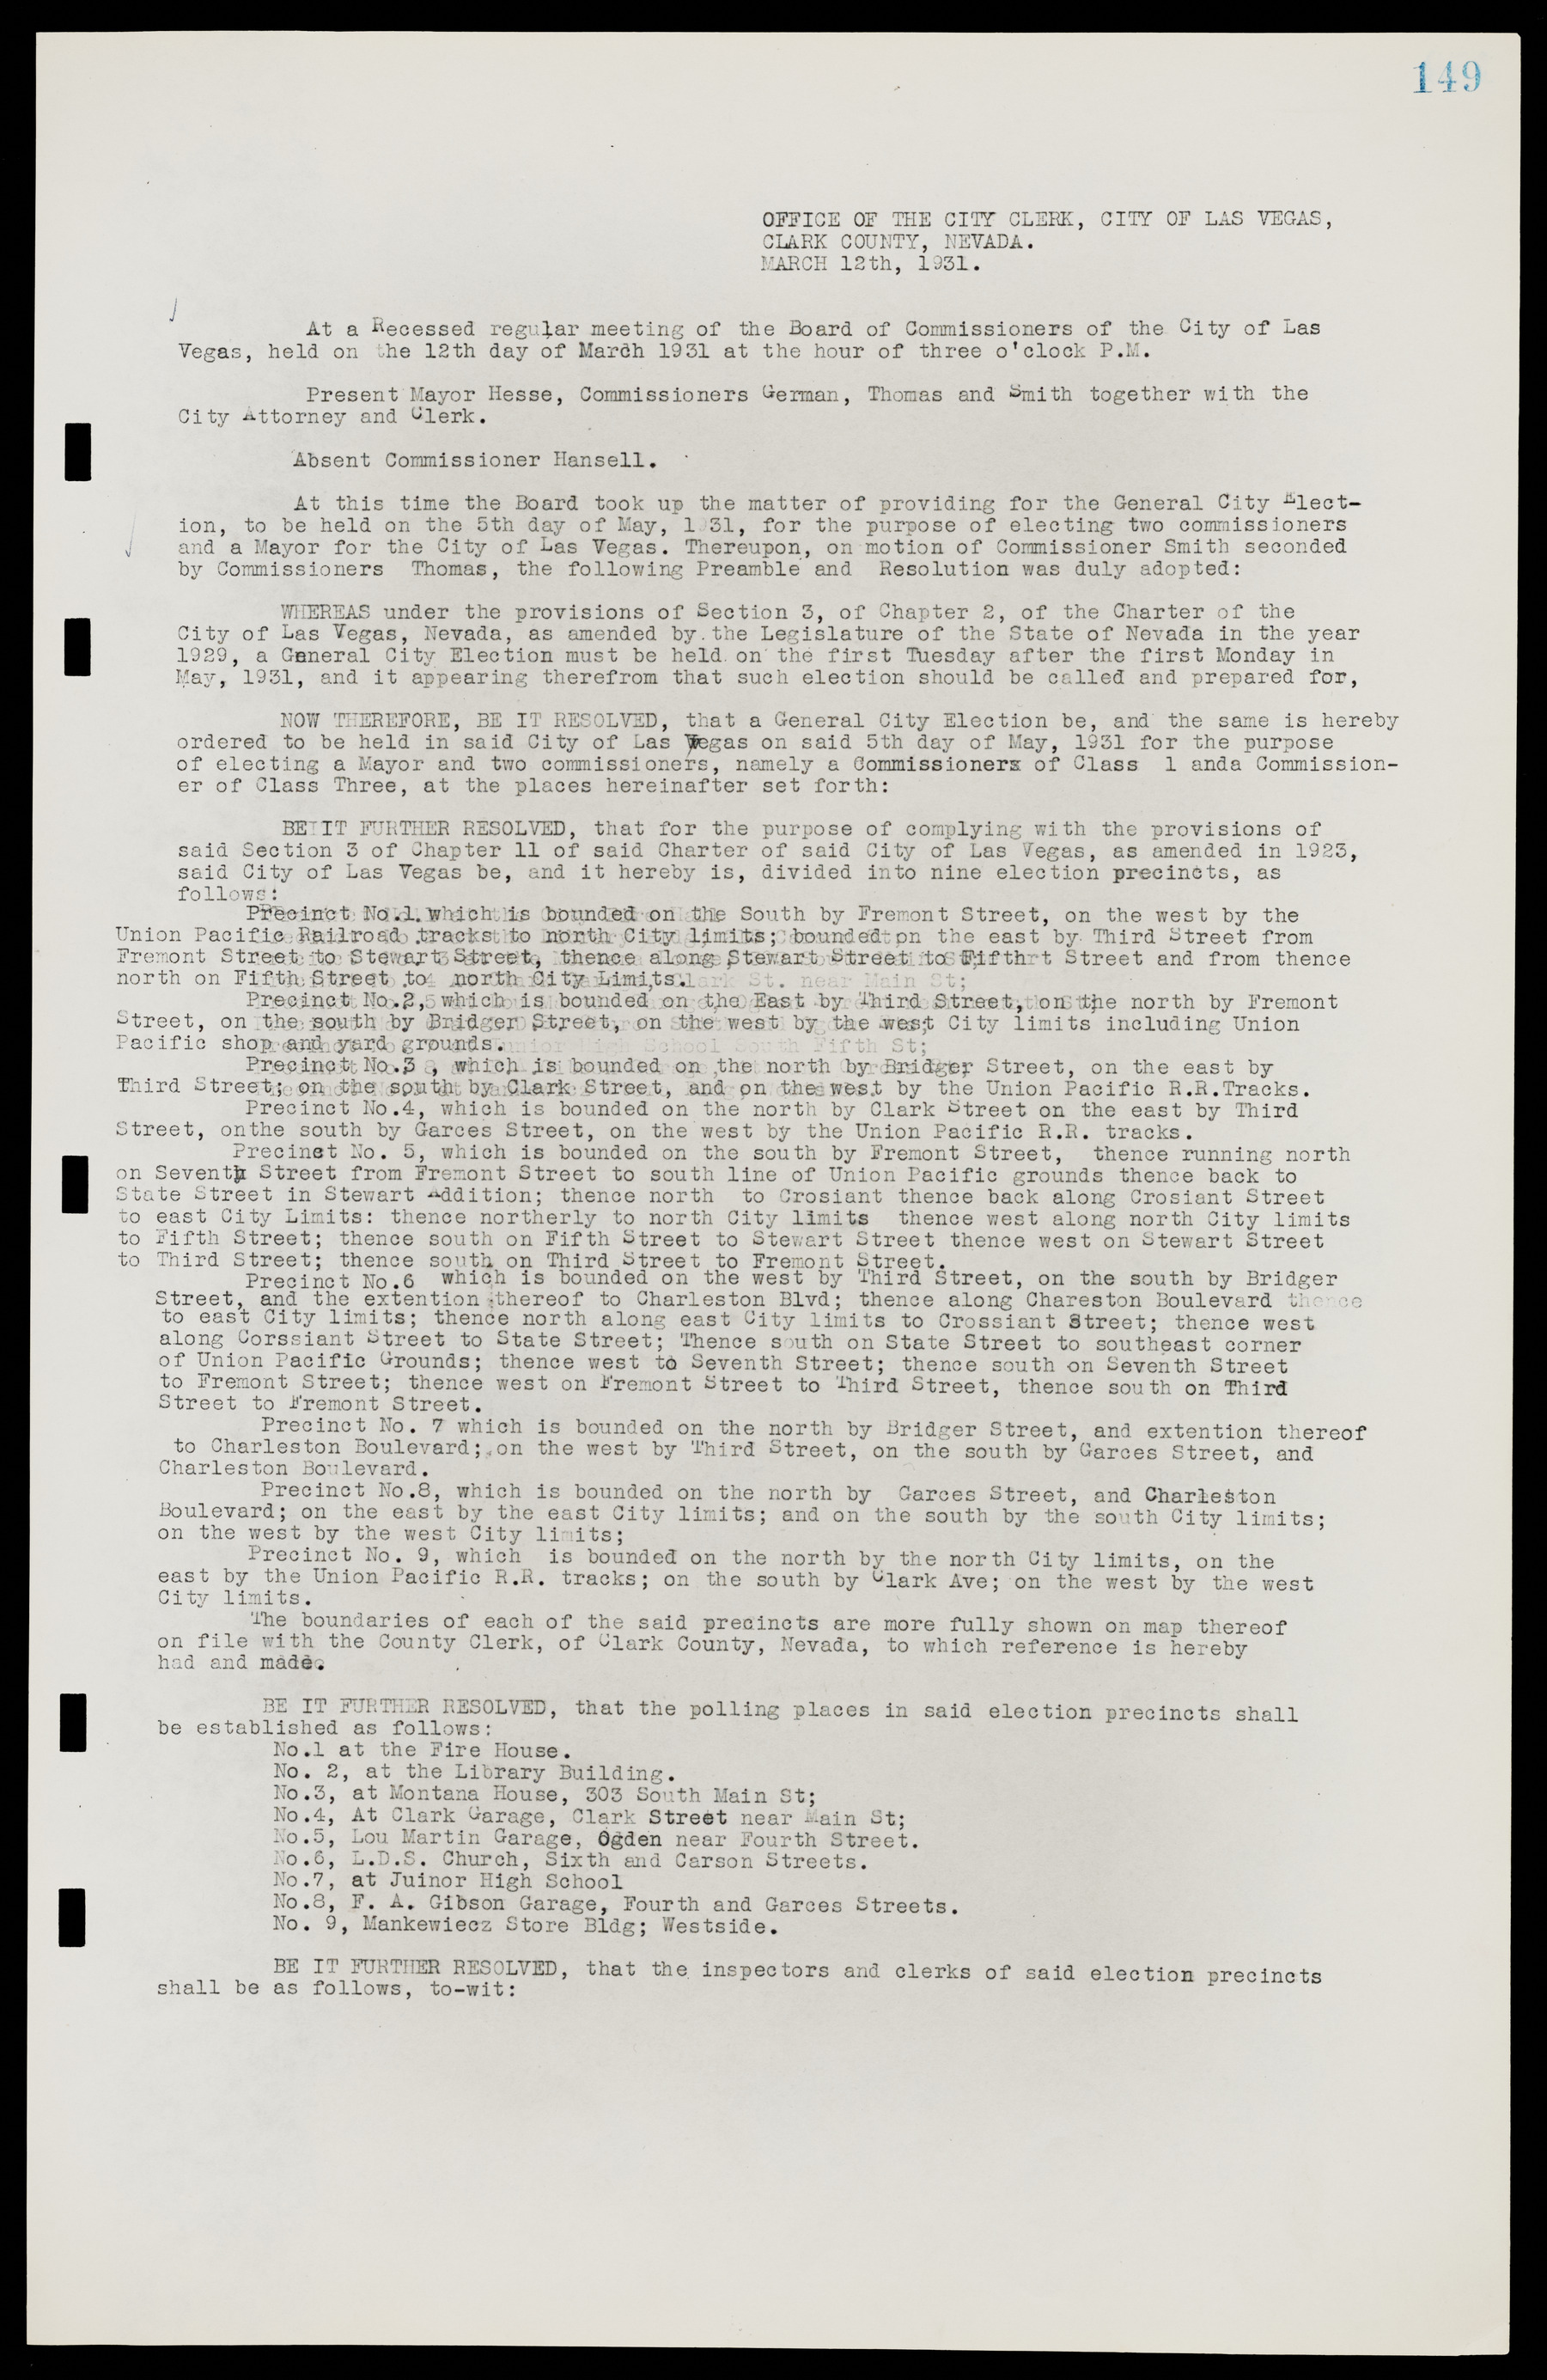 Las Vegas City Commission Minutes, May 14, 1929 to February 11, 1937, lvc000003-155